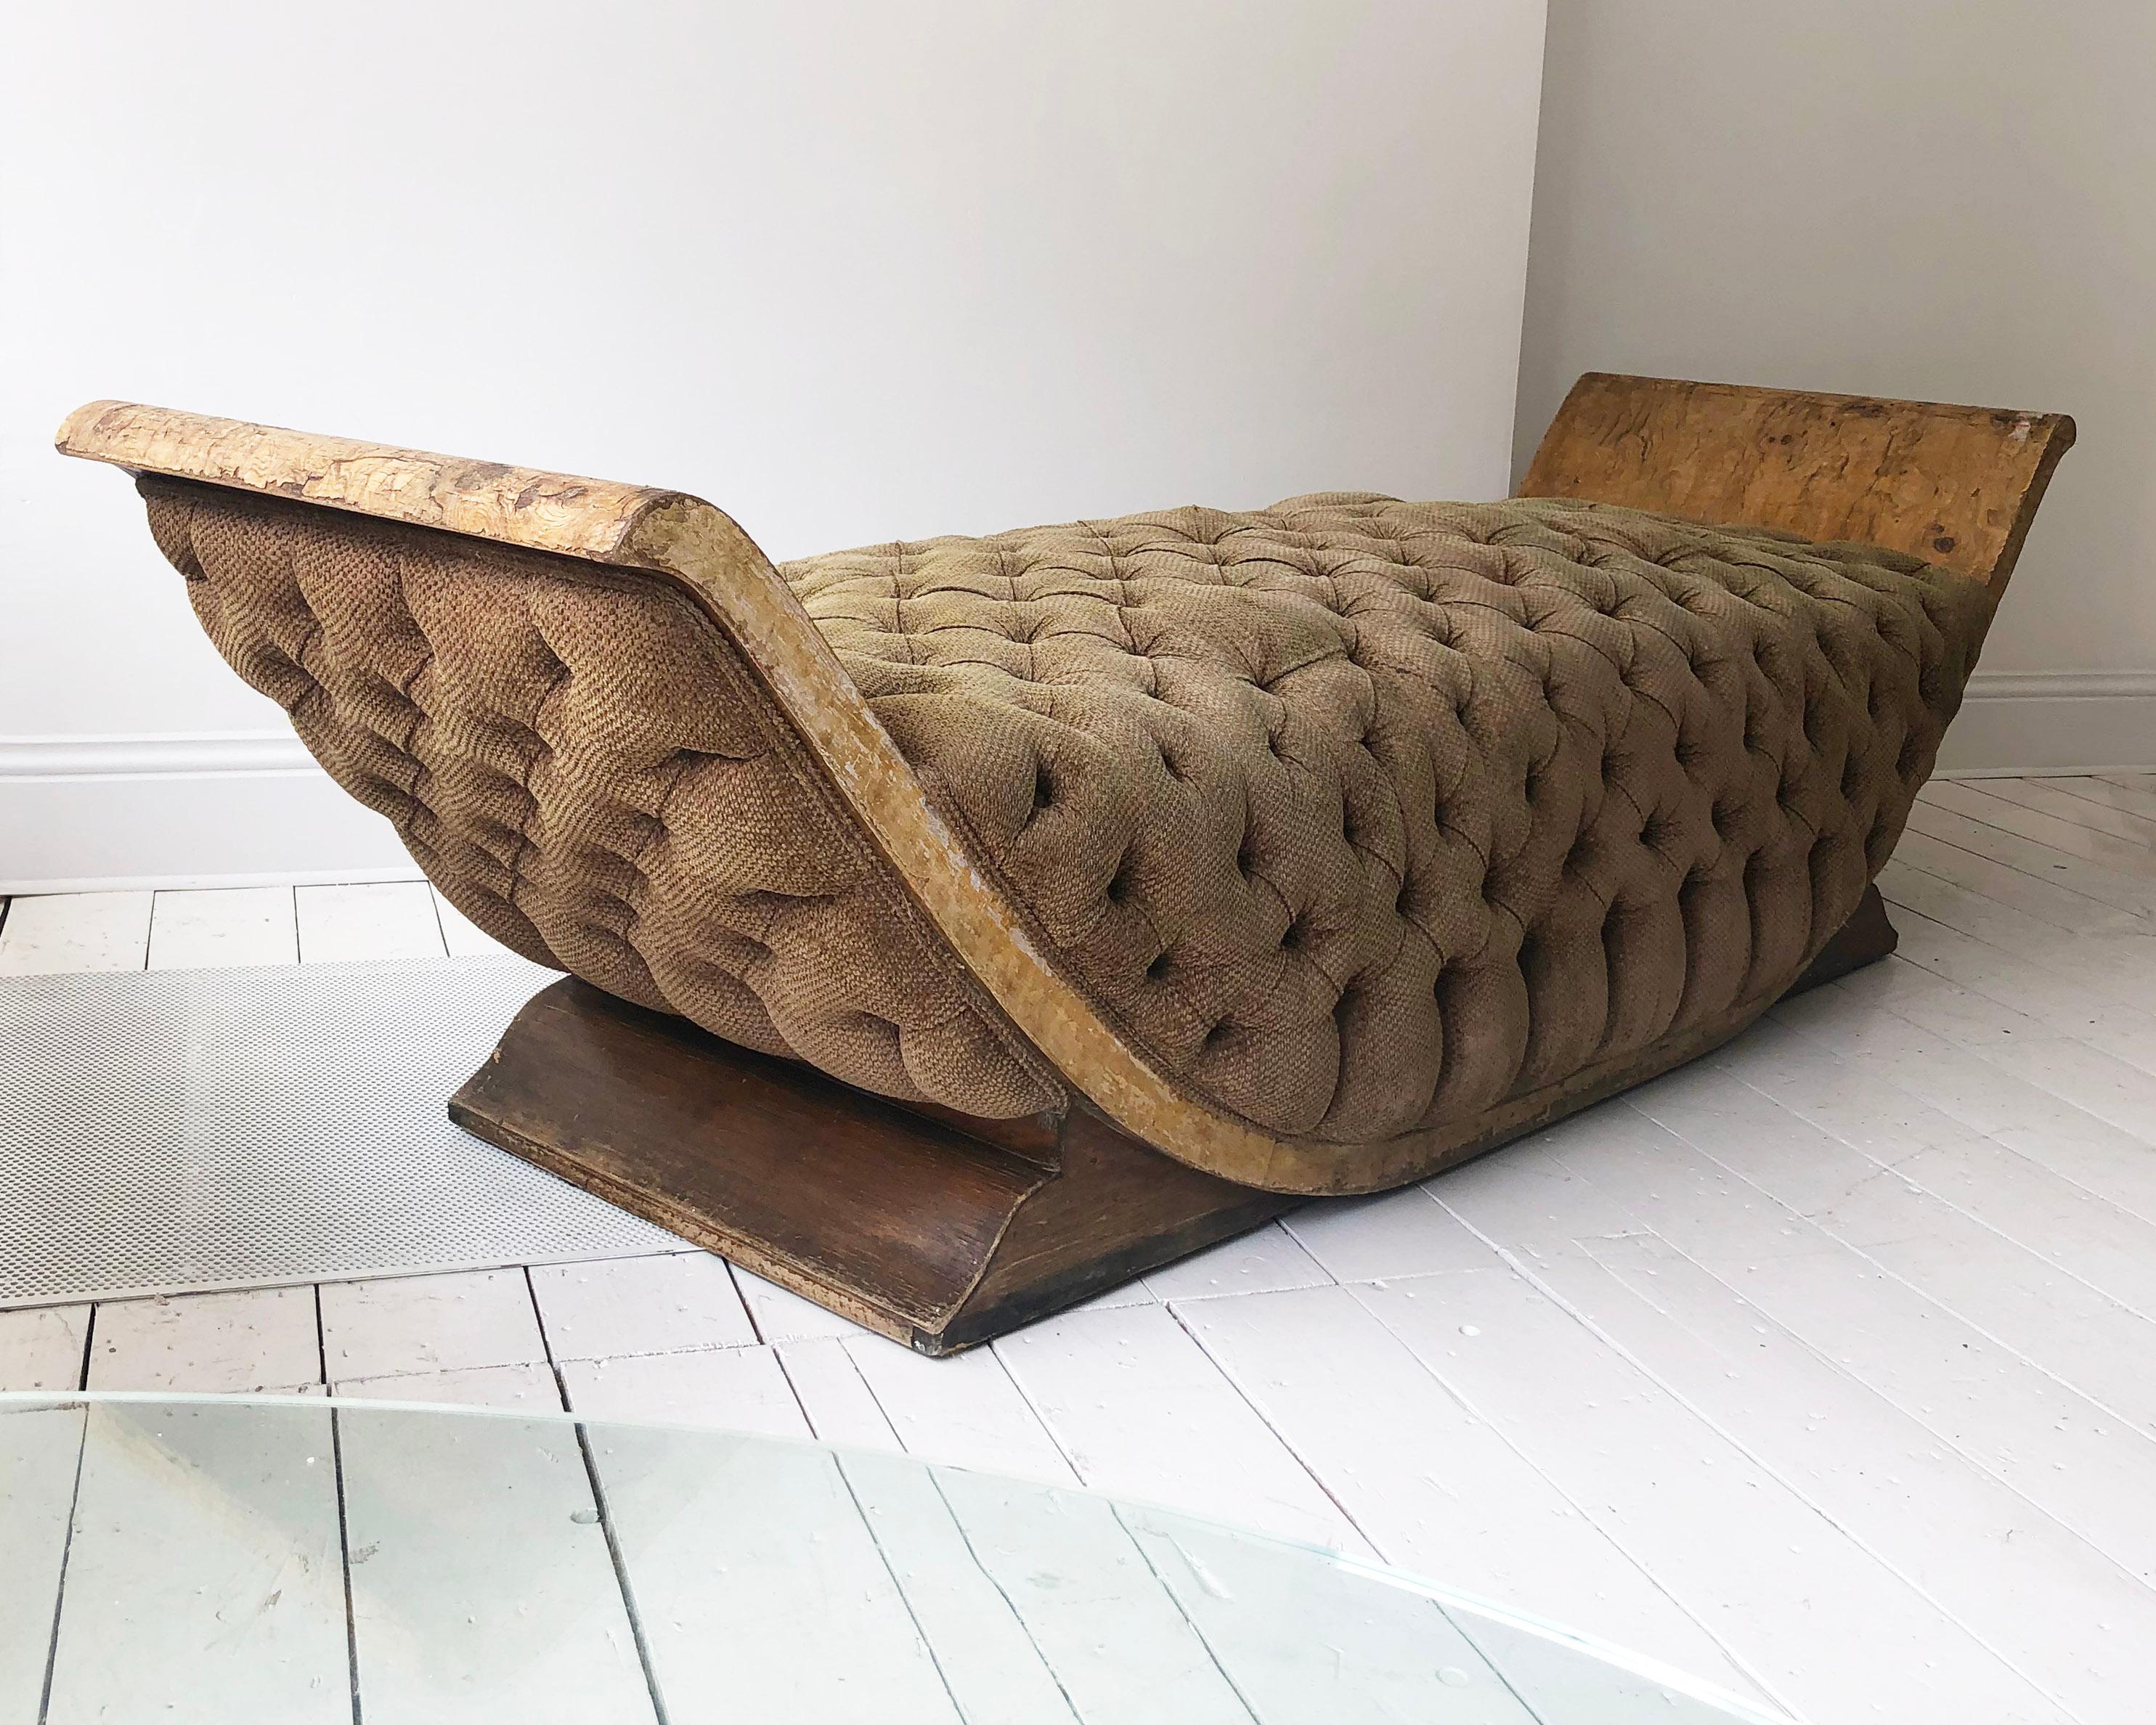 Mid-20th Century French Art Deco Distressed Gondola Chaise Longue Antique Daybed Vintage